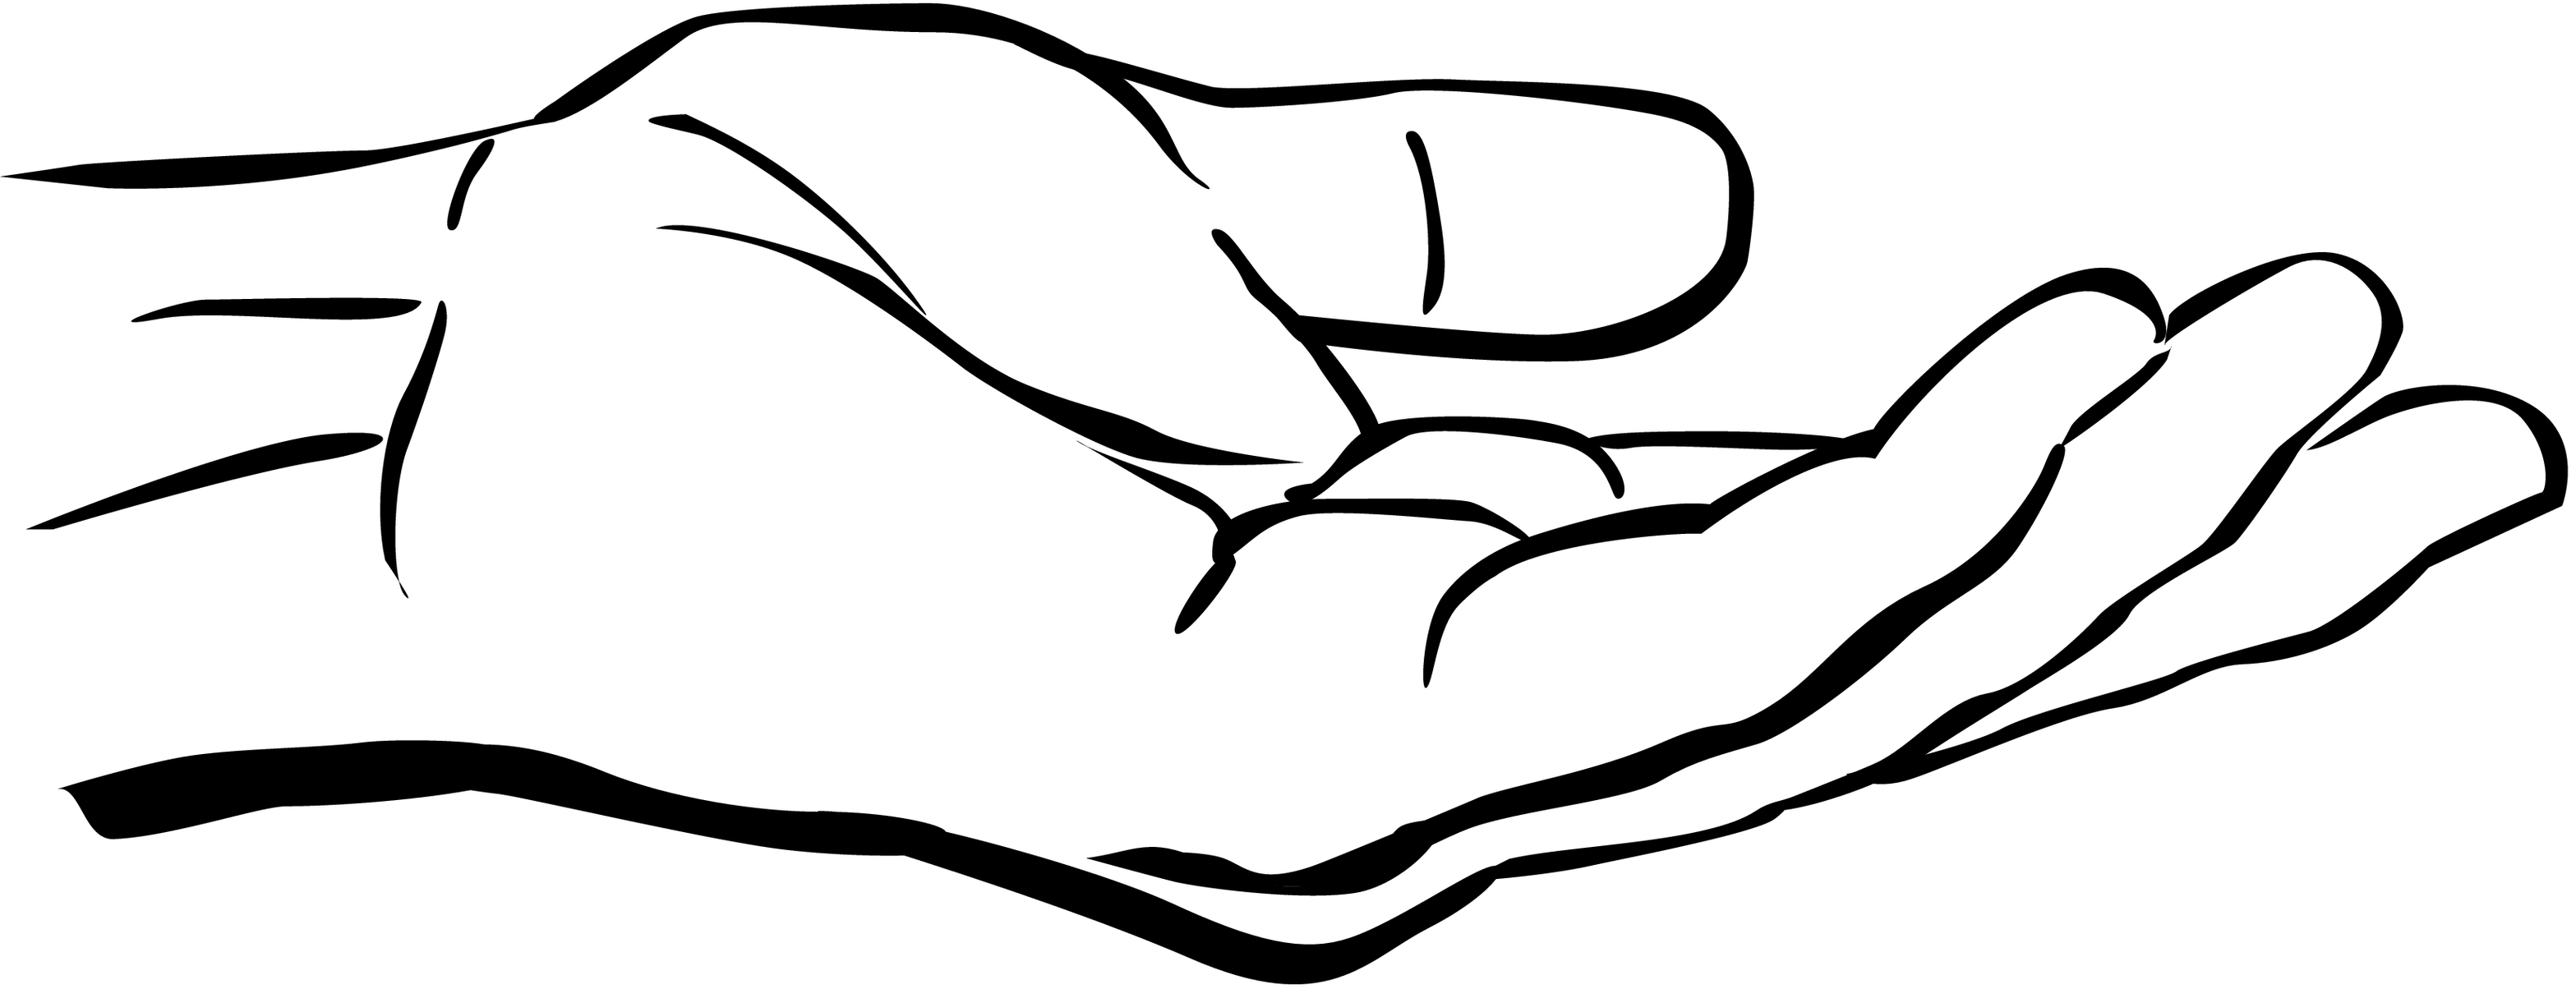 Line Drawing Of Hand Clipart - Free to use Clip Art Resource